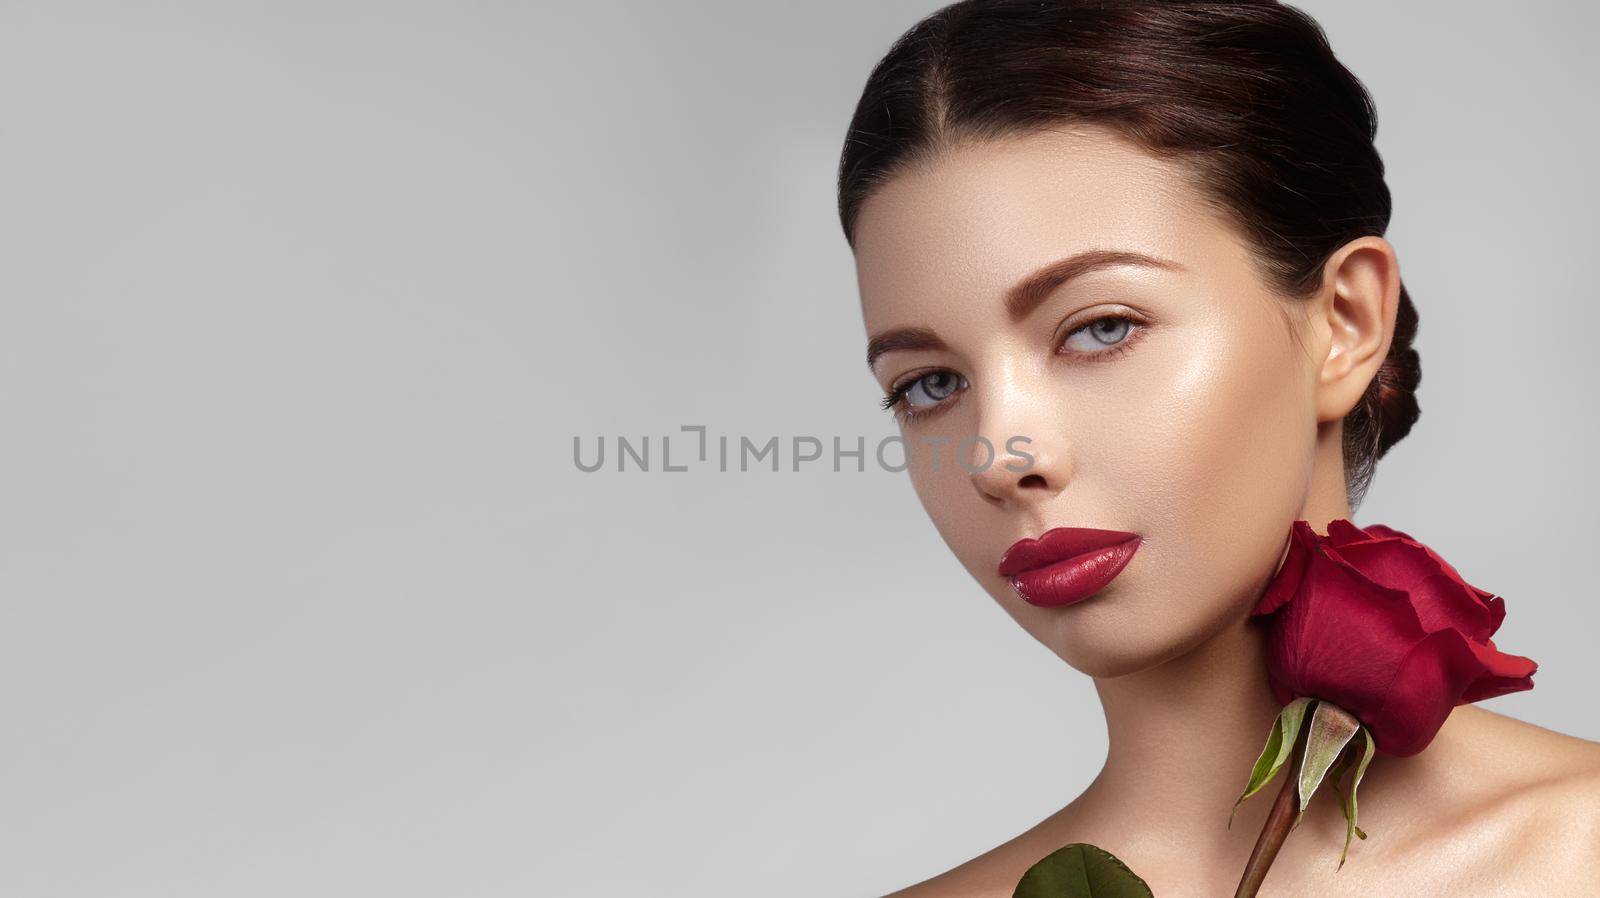 Beautiful woman with bright lipgloss makeup. Perfect clean skin, sexy red lip make-up. Romantic look for Valentines day by MarinaFrost